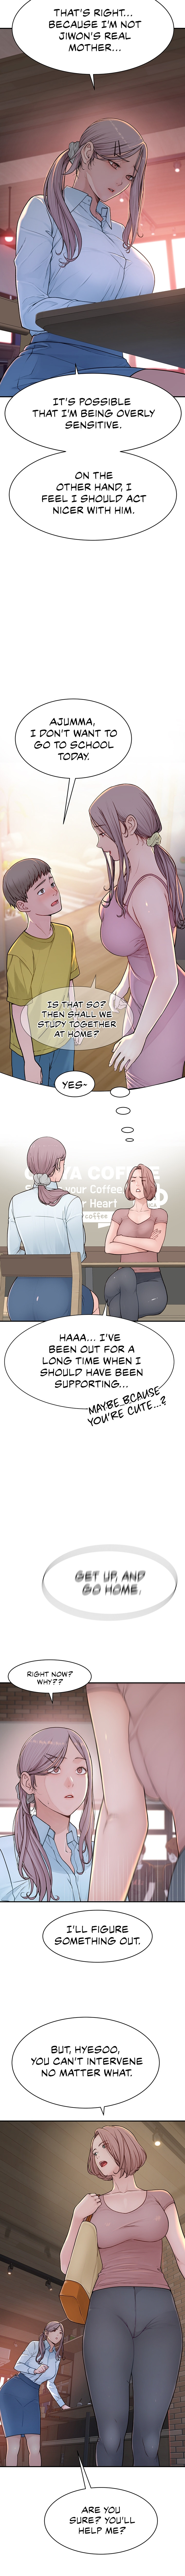 Addicted to My Stepmom - Chapter 2 Page 16